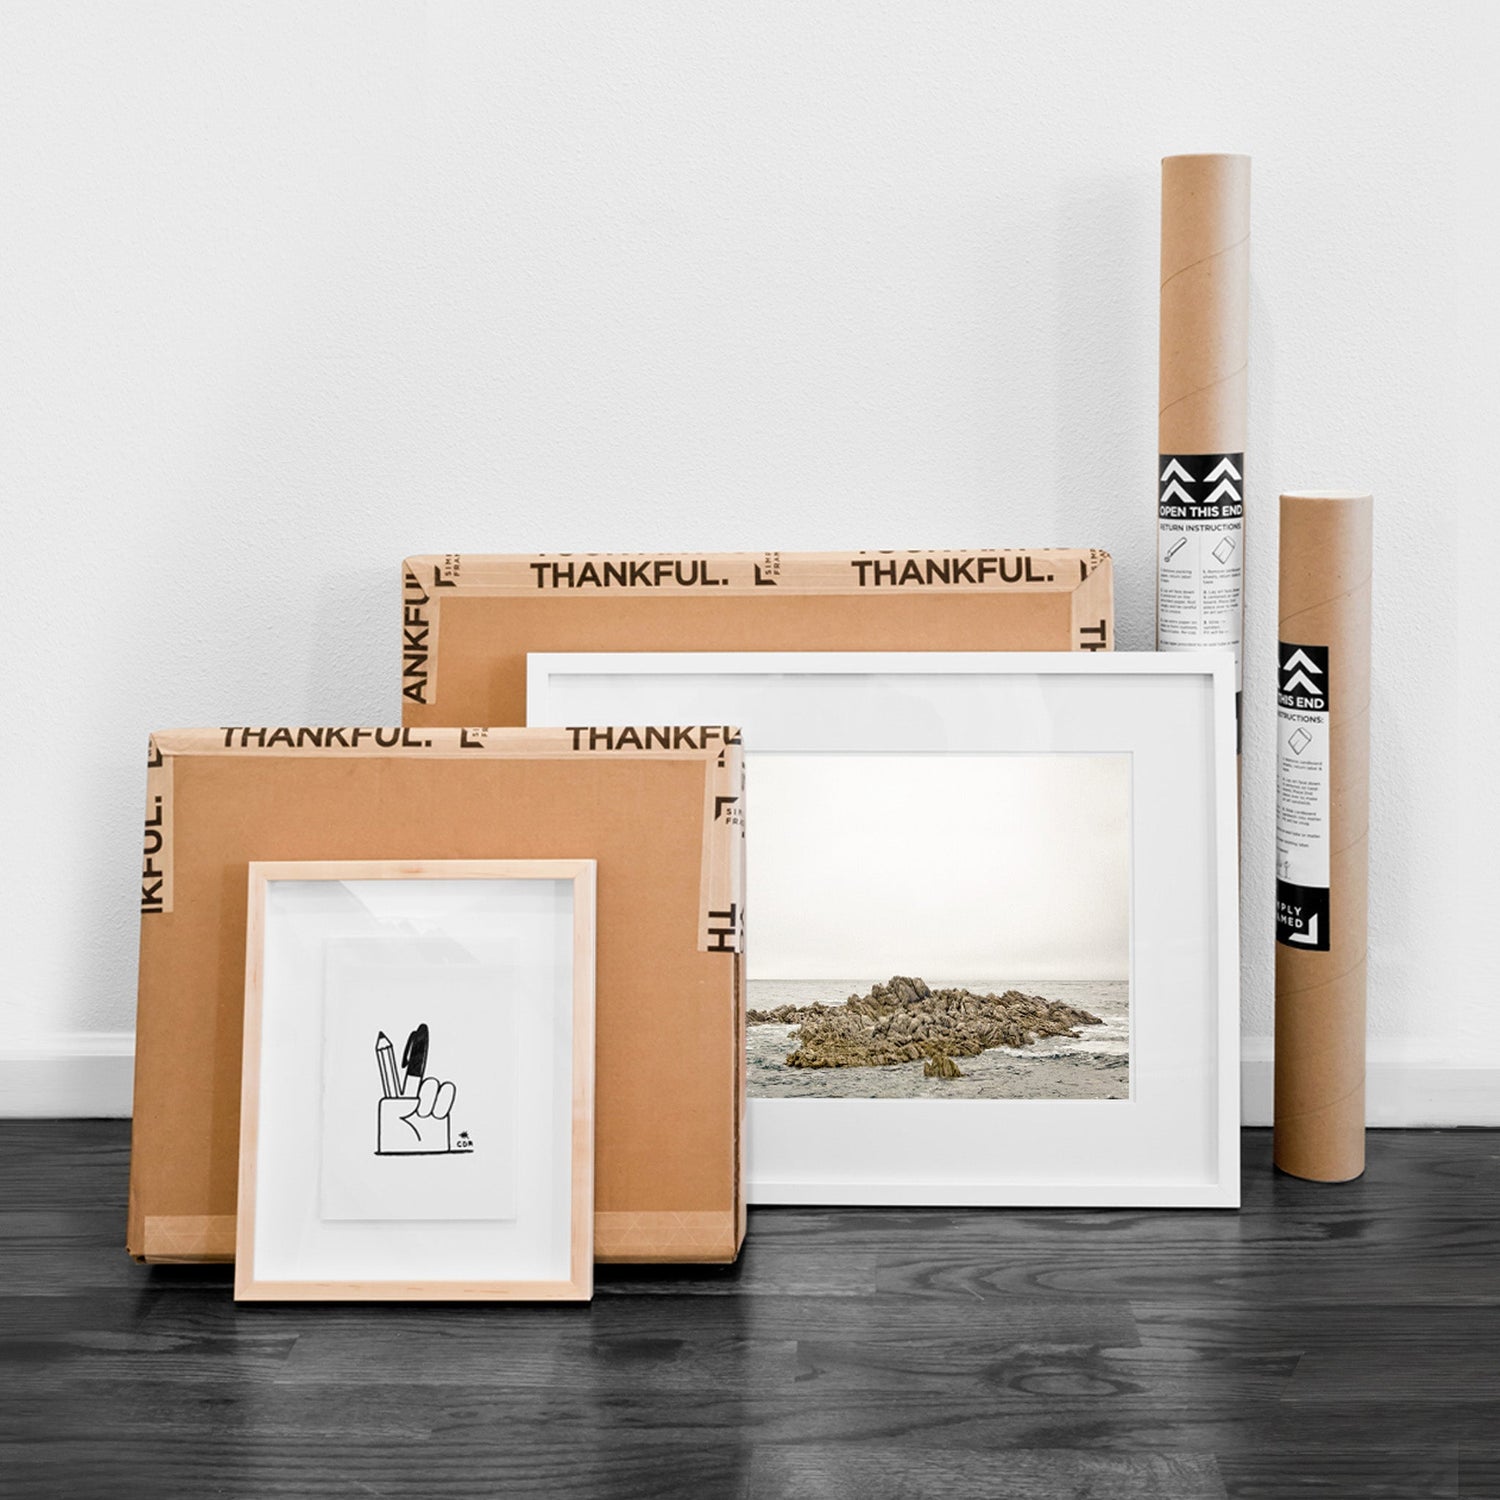 Unfinished Natural Wood Gallery Frames - Ambiance